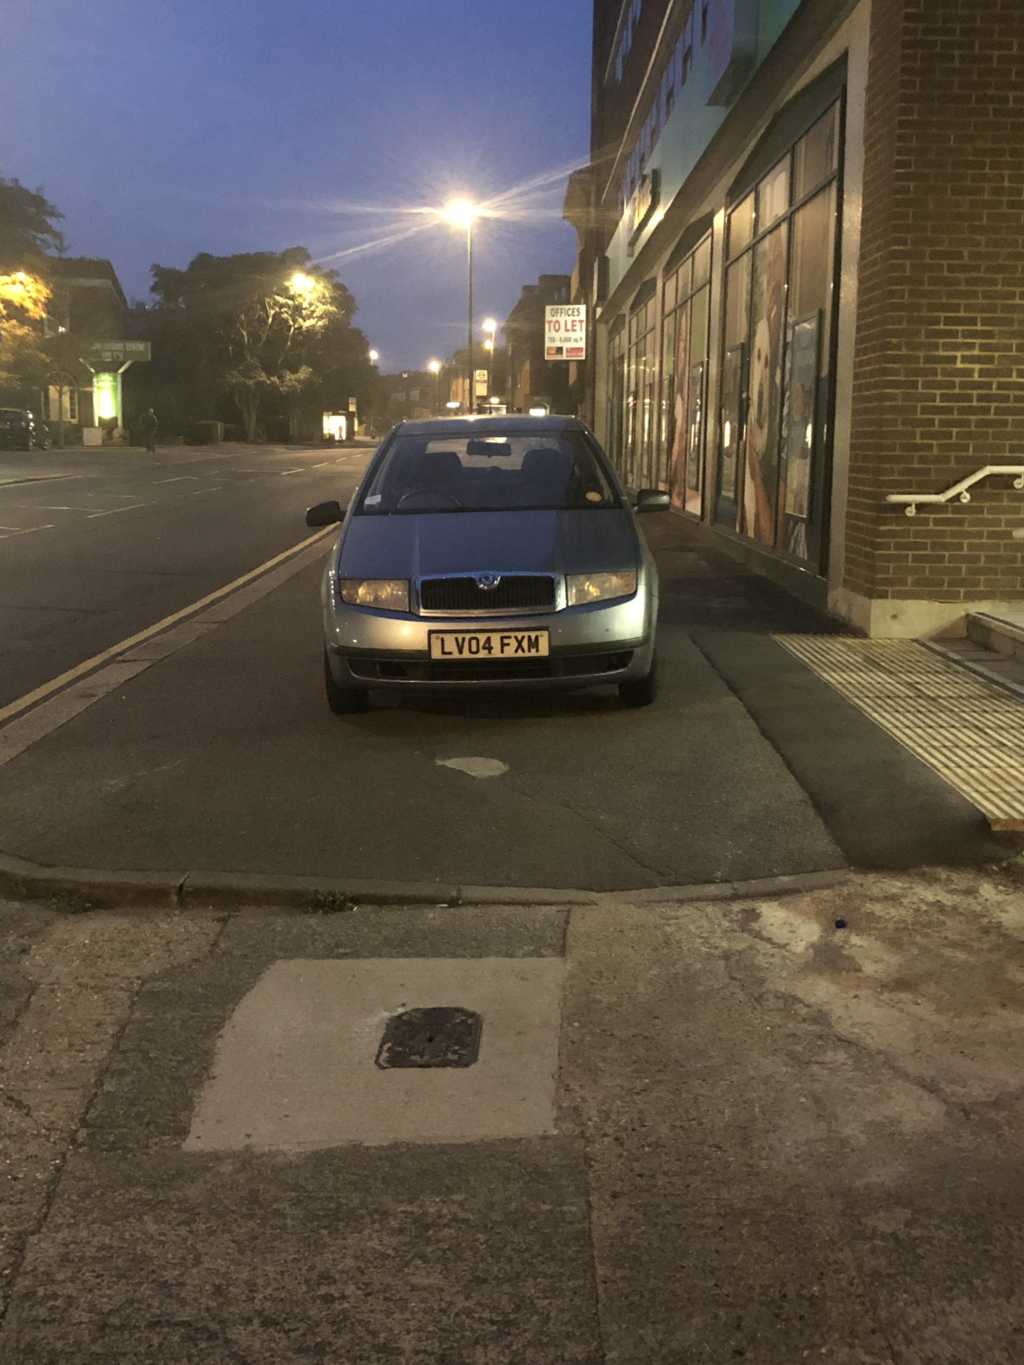 LV04 FXM is an Inconsiderate Parker